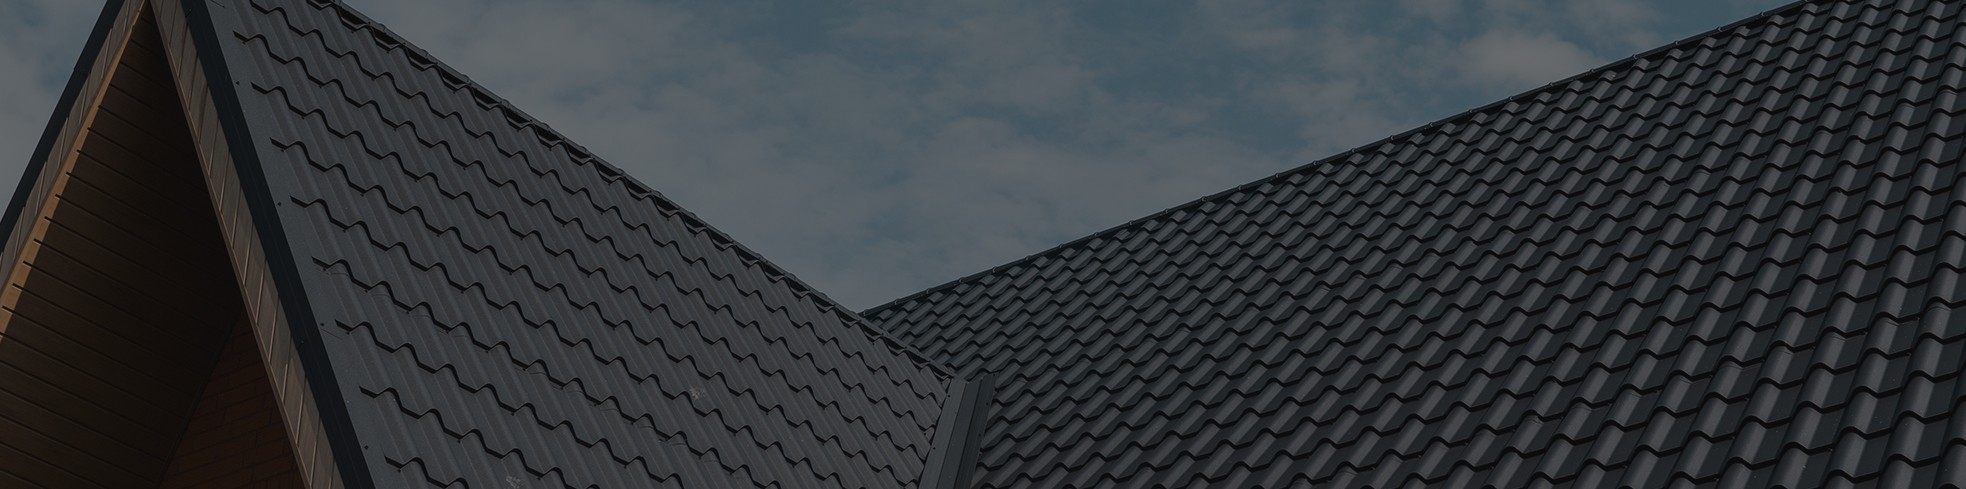 CertainTeed Matterhorn slate and shake metal roofing panels available in multiple colors 